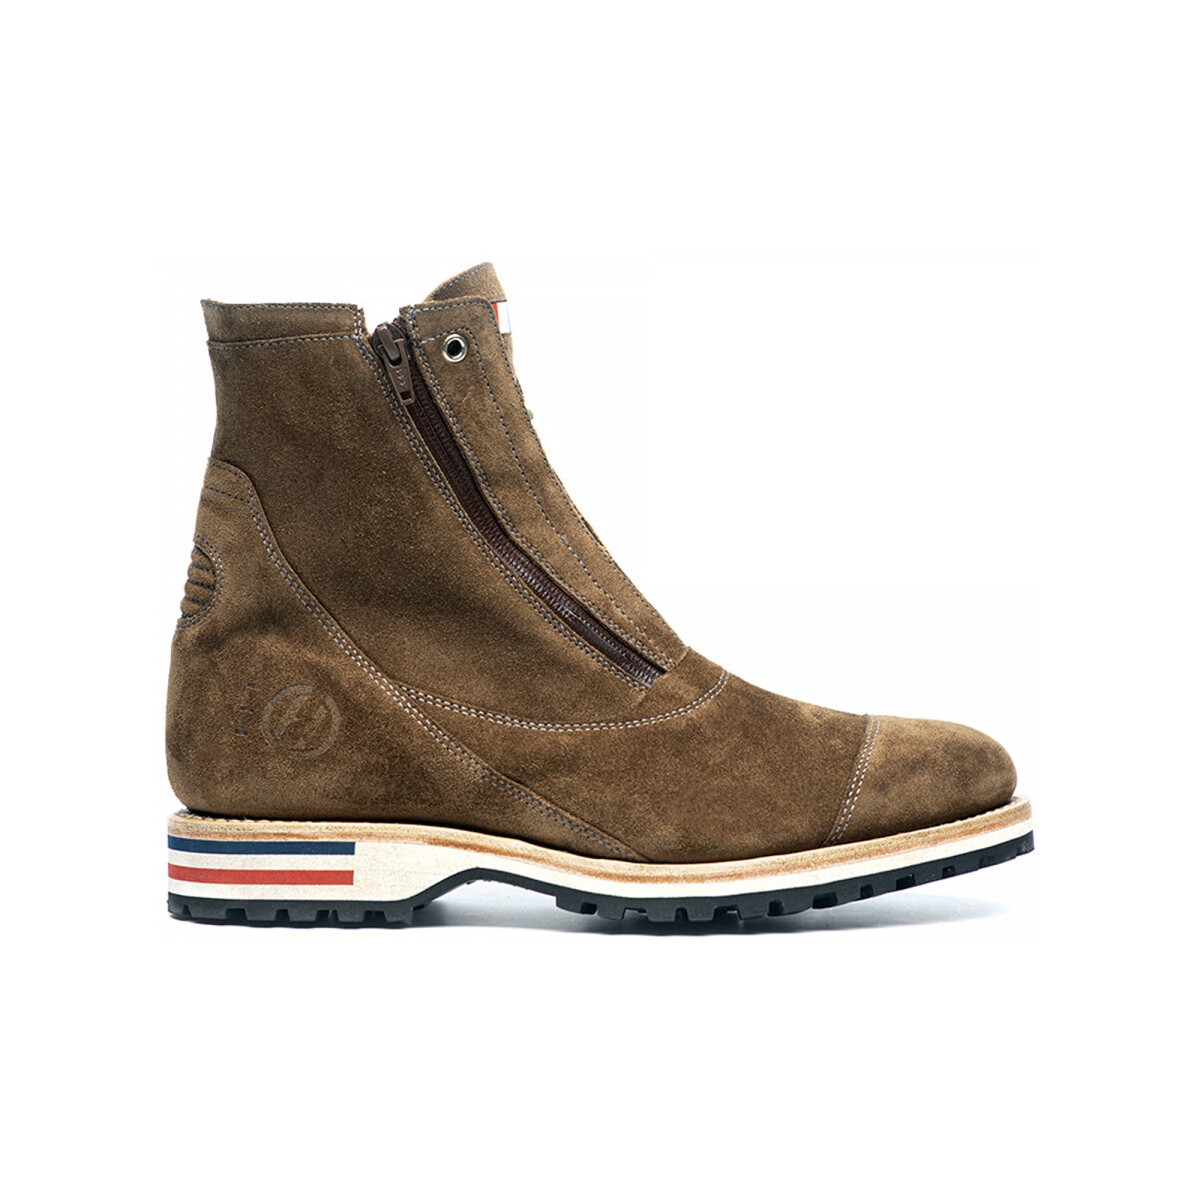 Chaussures Homme Boots Hardrige Rafale Autres